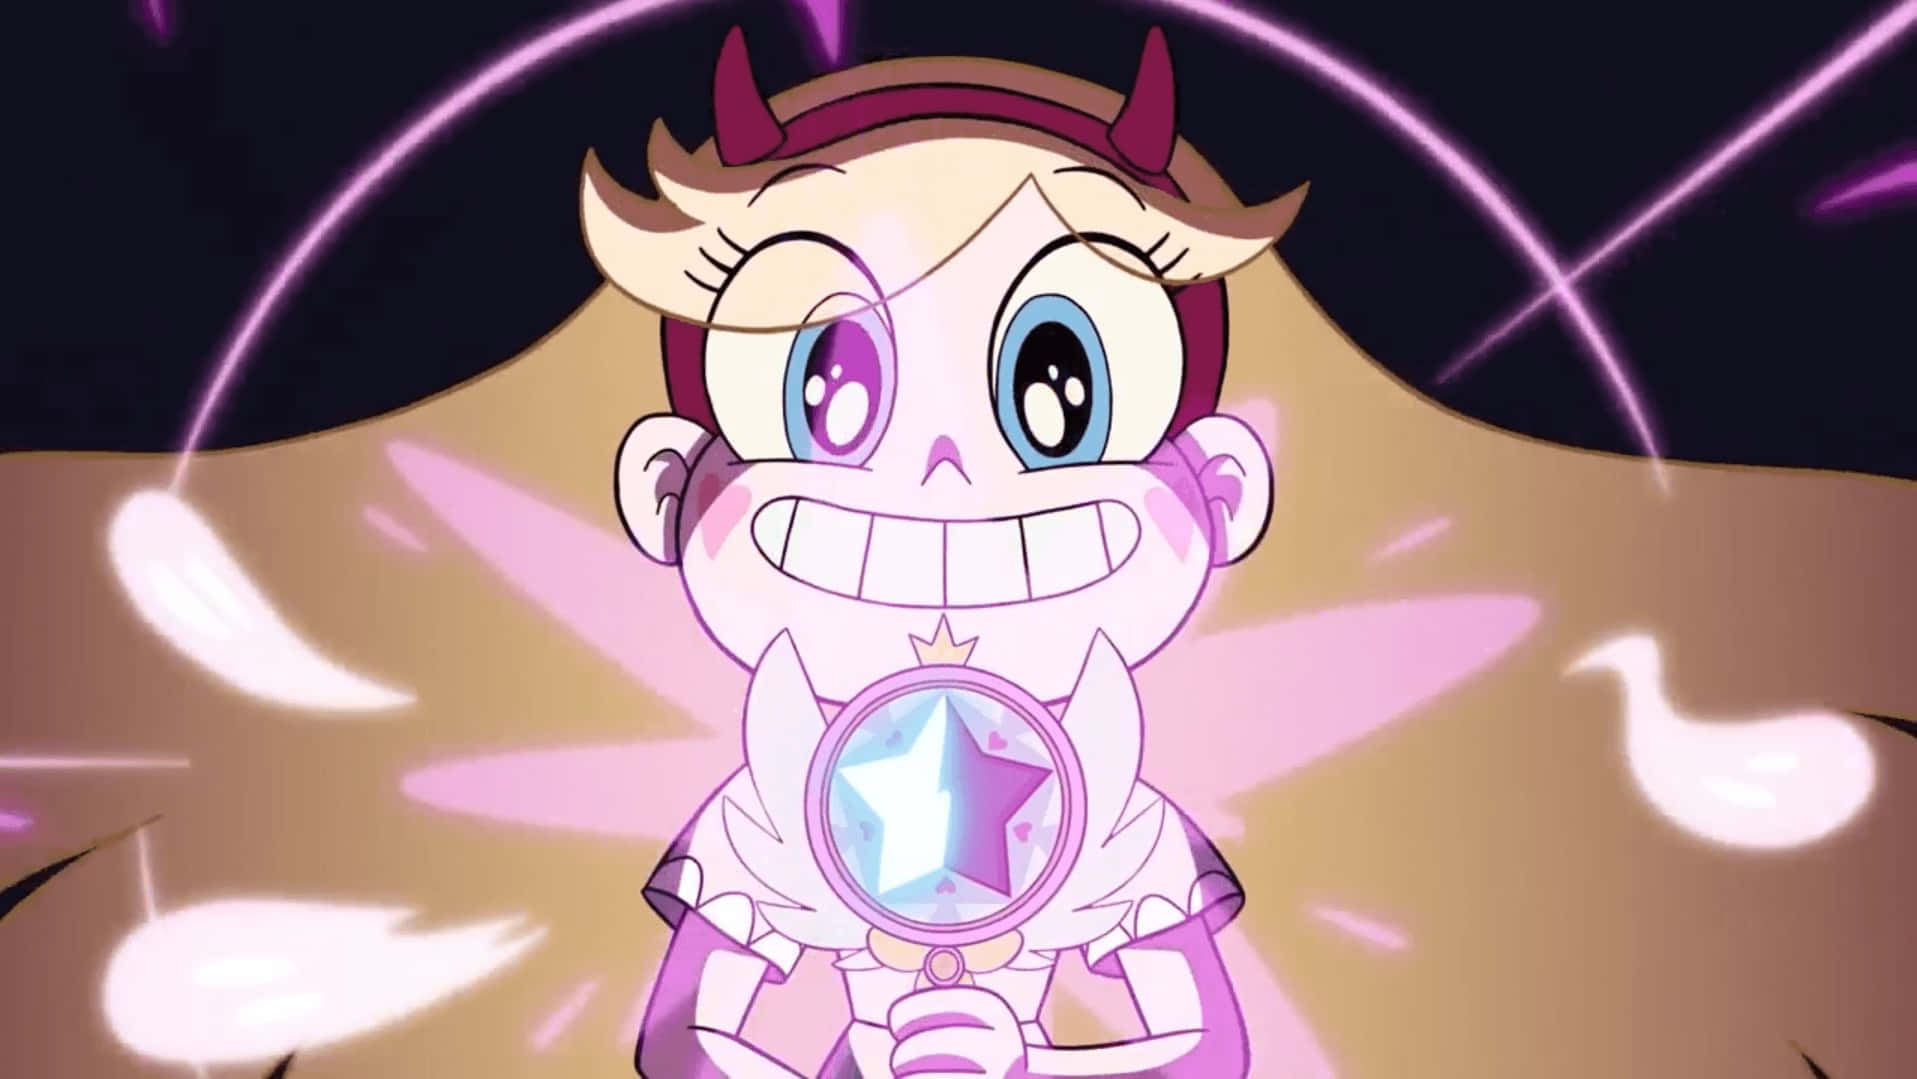 Star and Marco in an epic battle against evil forces